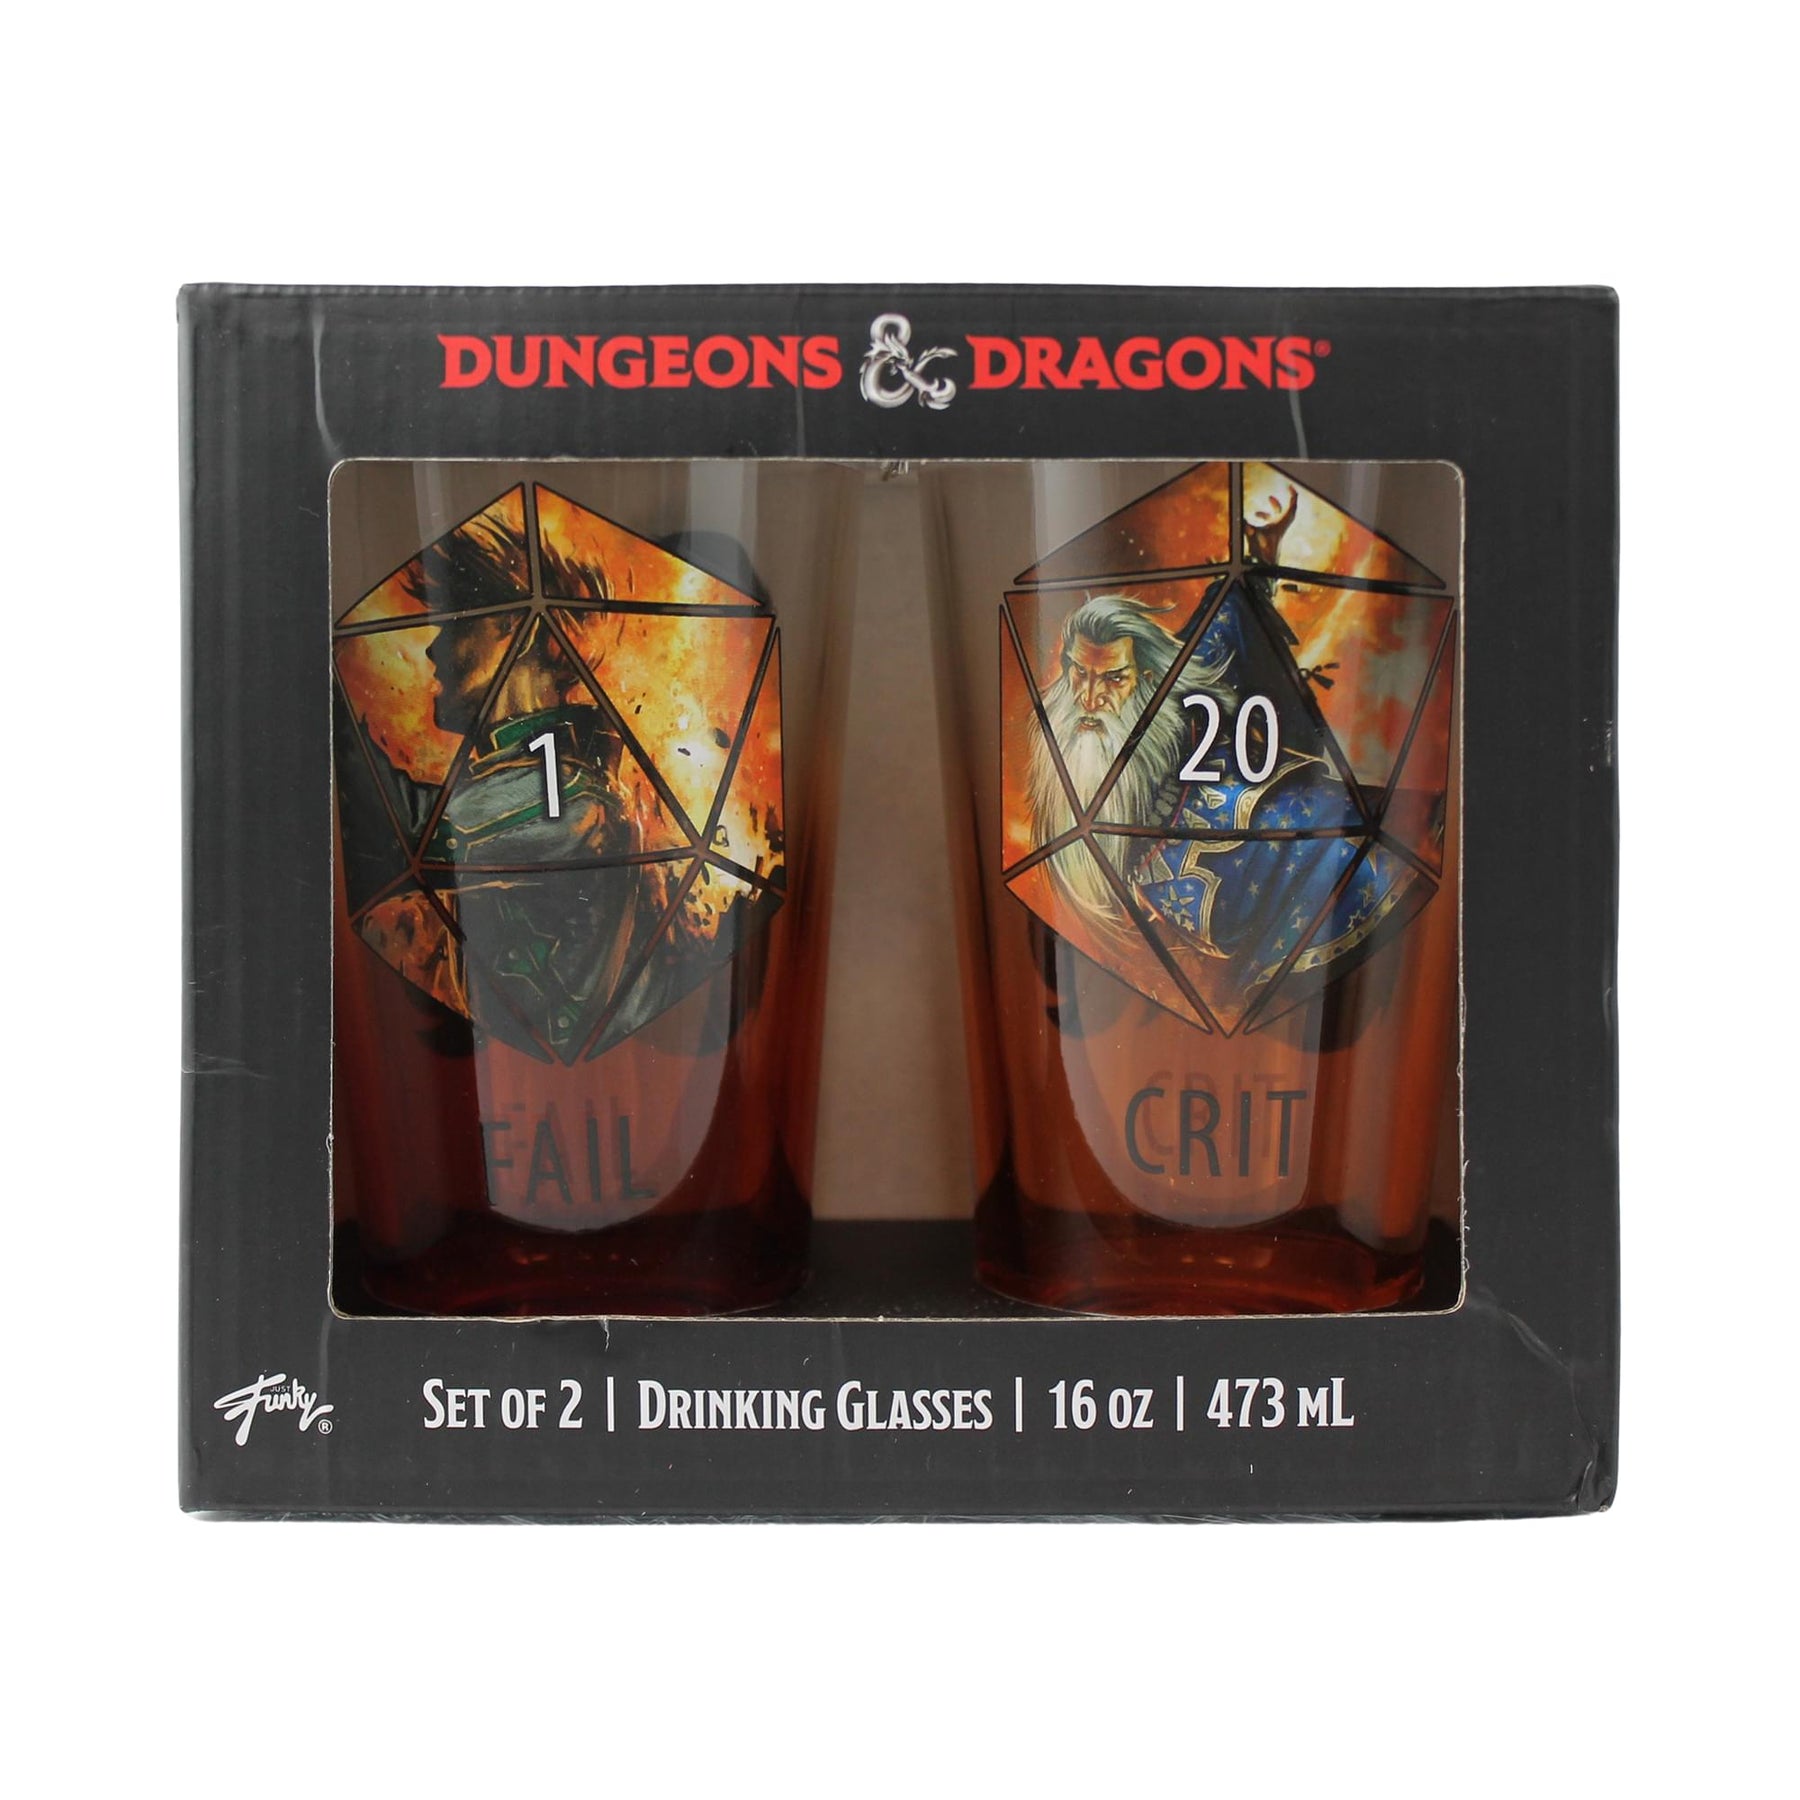 Just Funky Dungeons And Dragons Set Of 2 Drinking Glasses 16oz New In Box